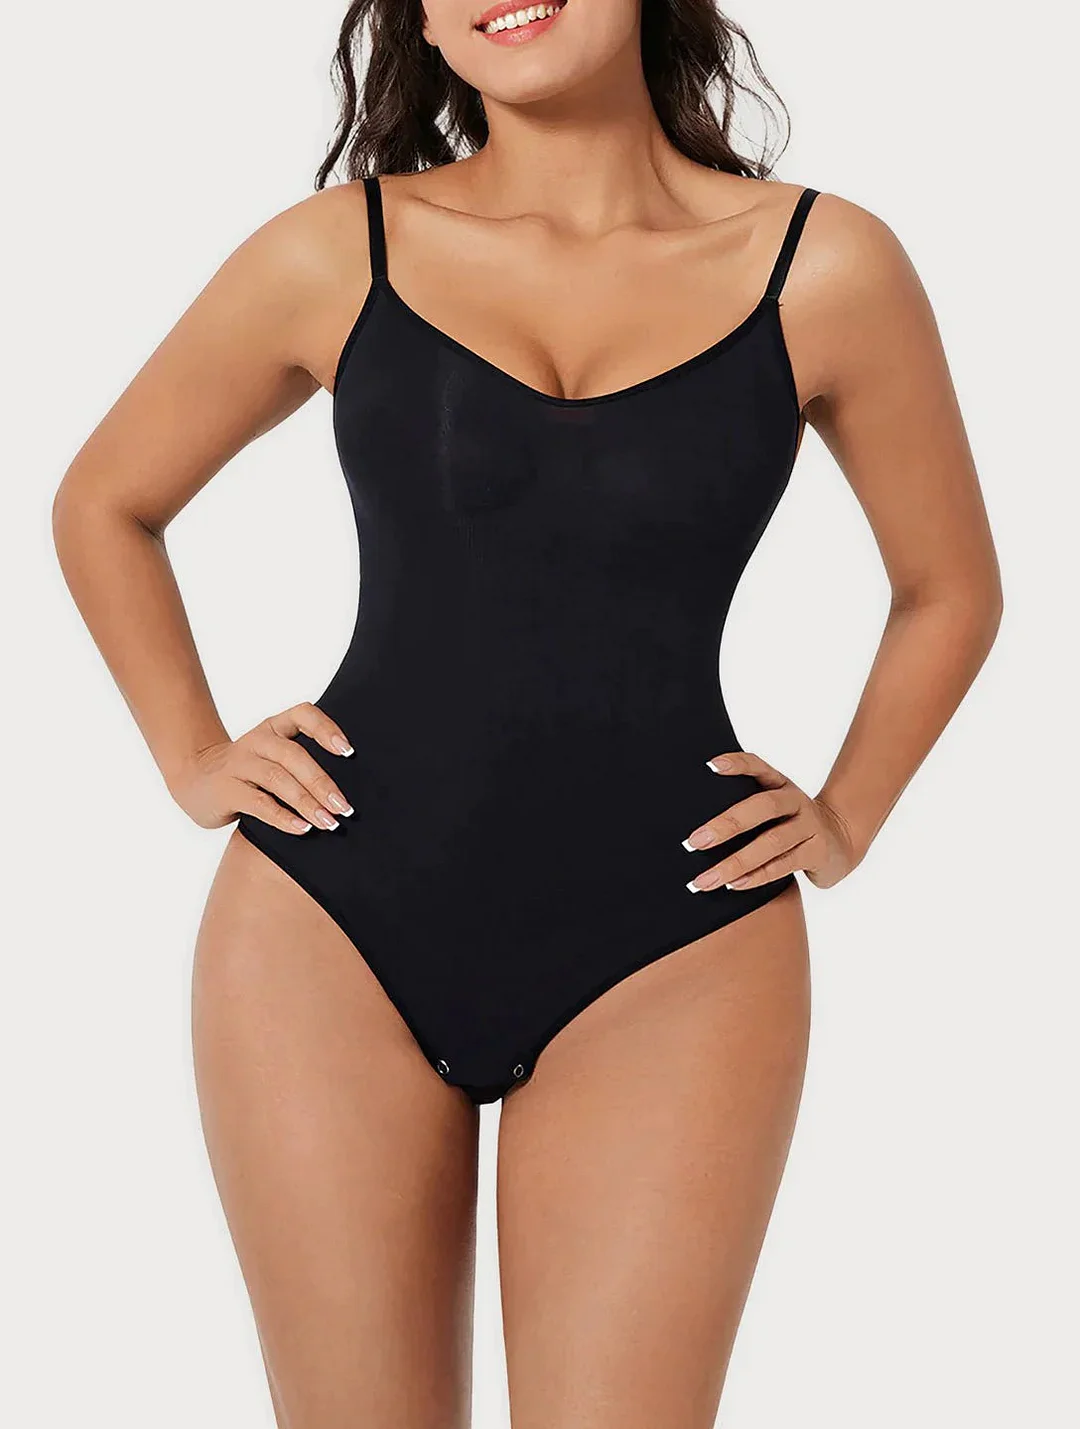 ✨ Limited Time Discount Last Day✨Snatched Shapewear Bodysuit